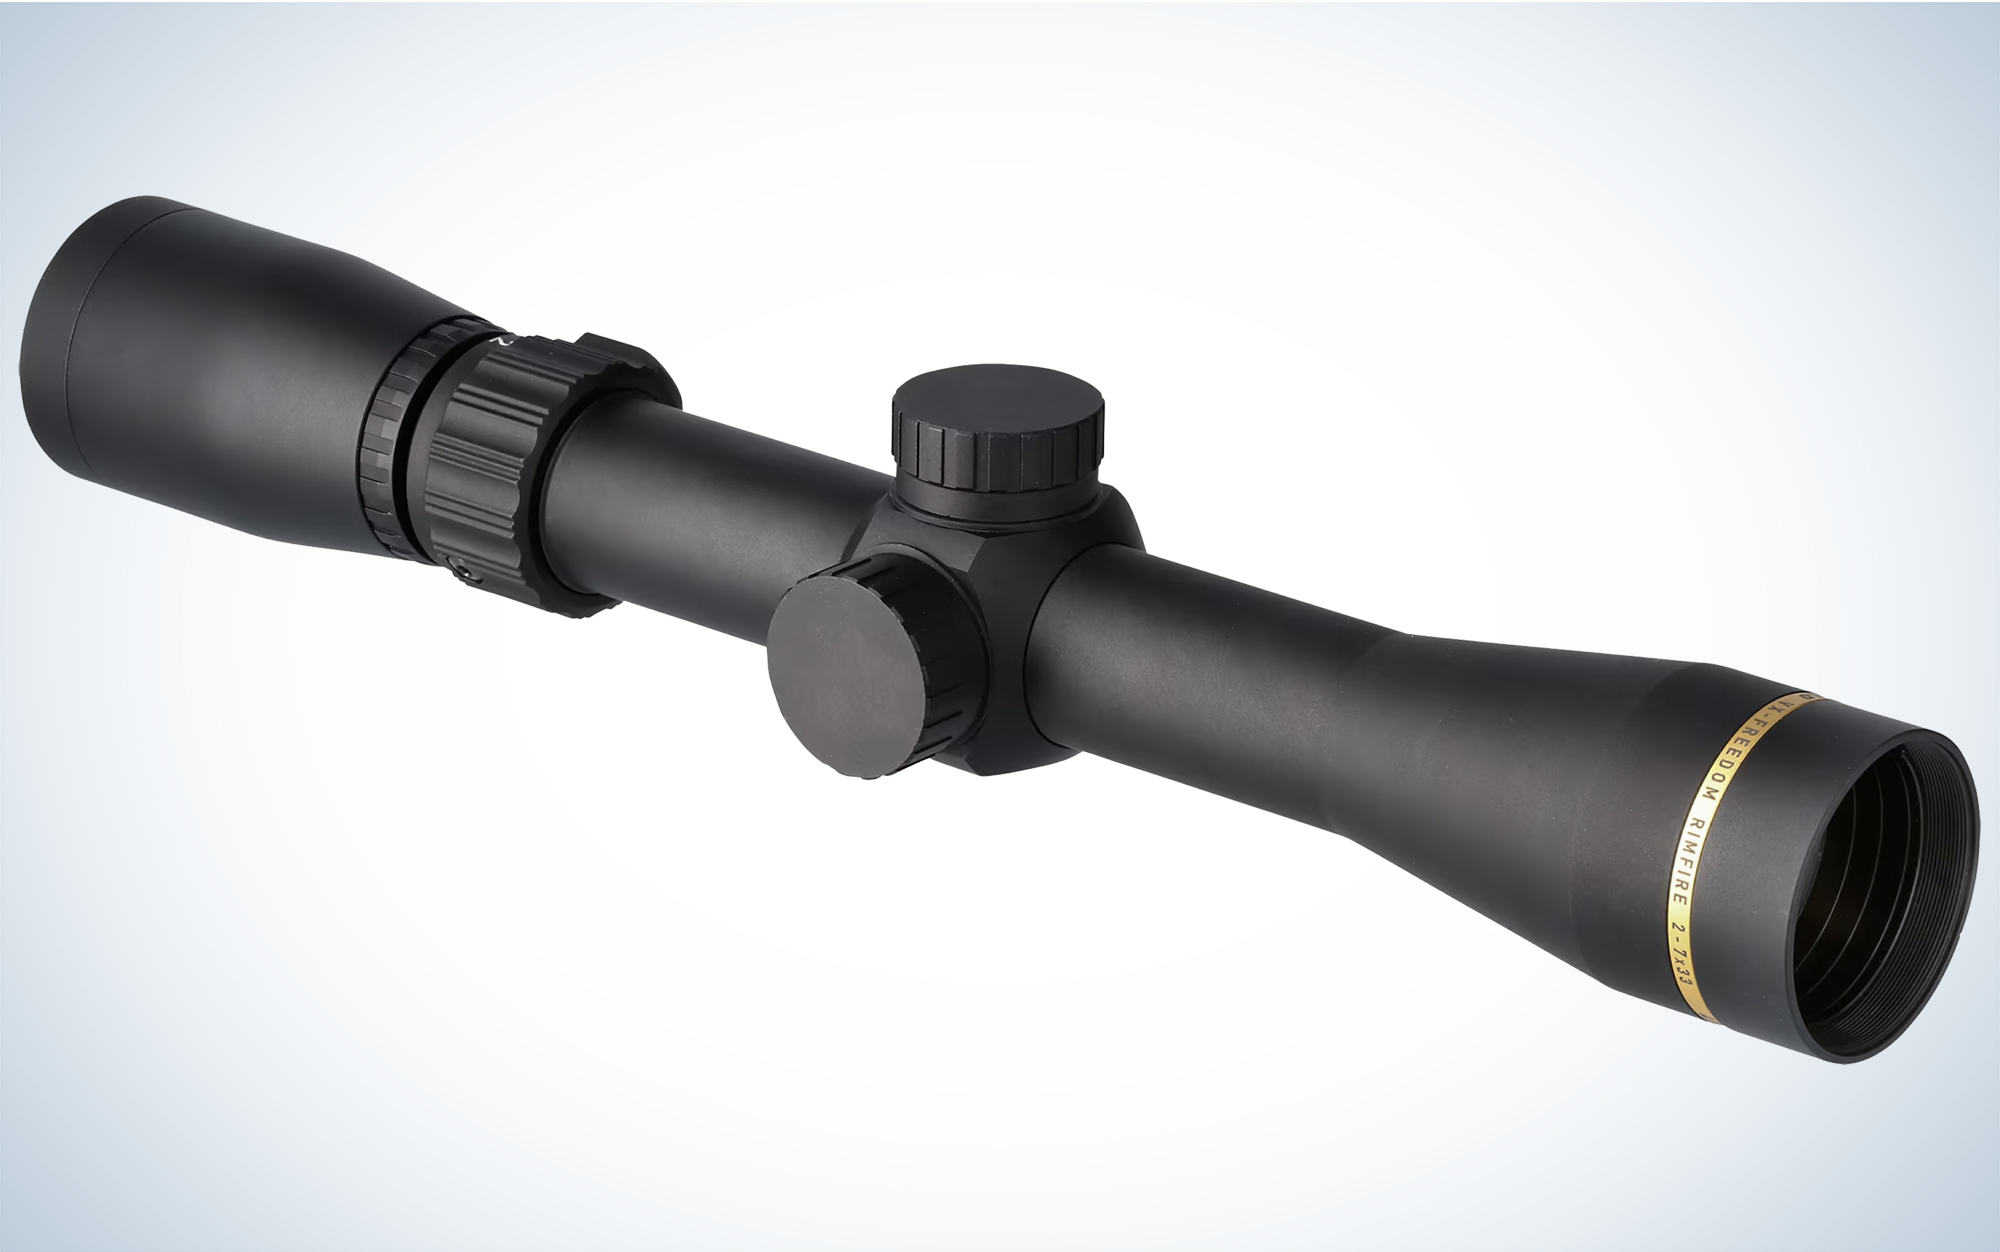 The Leupold VX-Freedom 2-7x33 is the best overall.